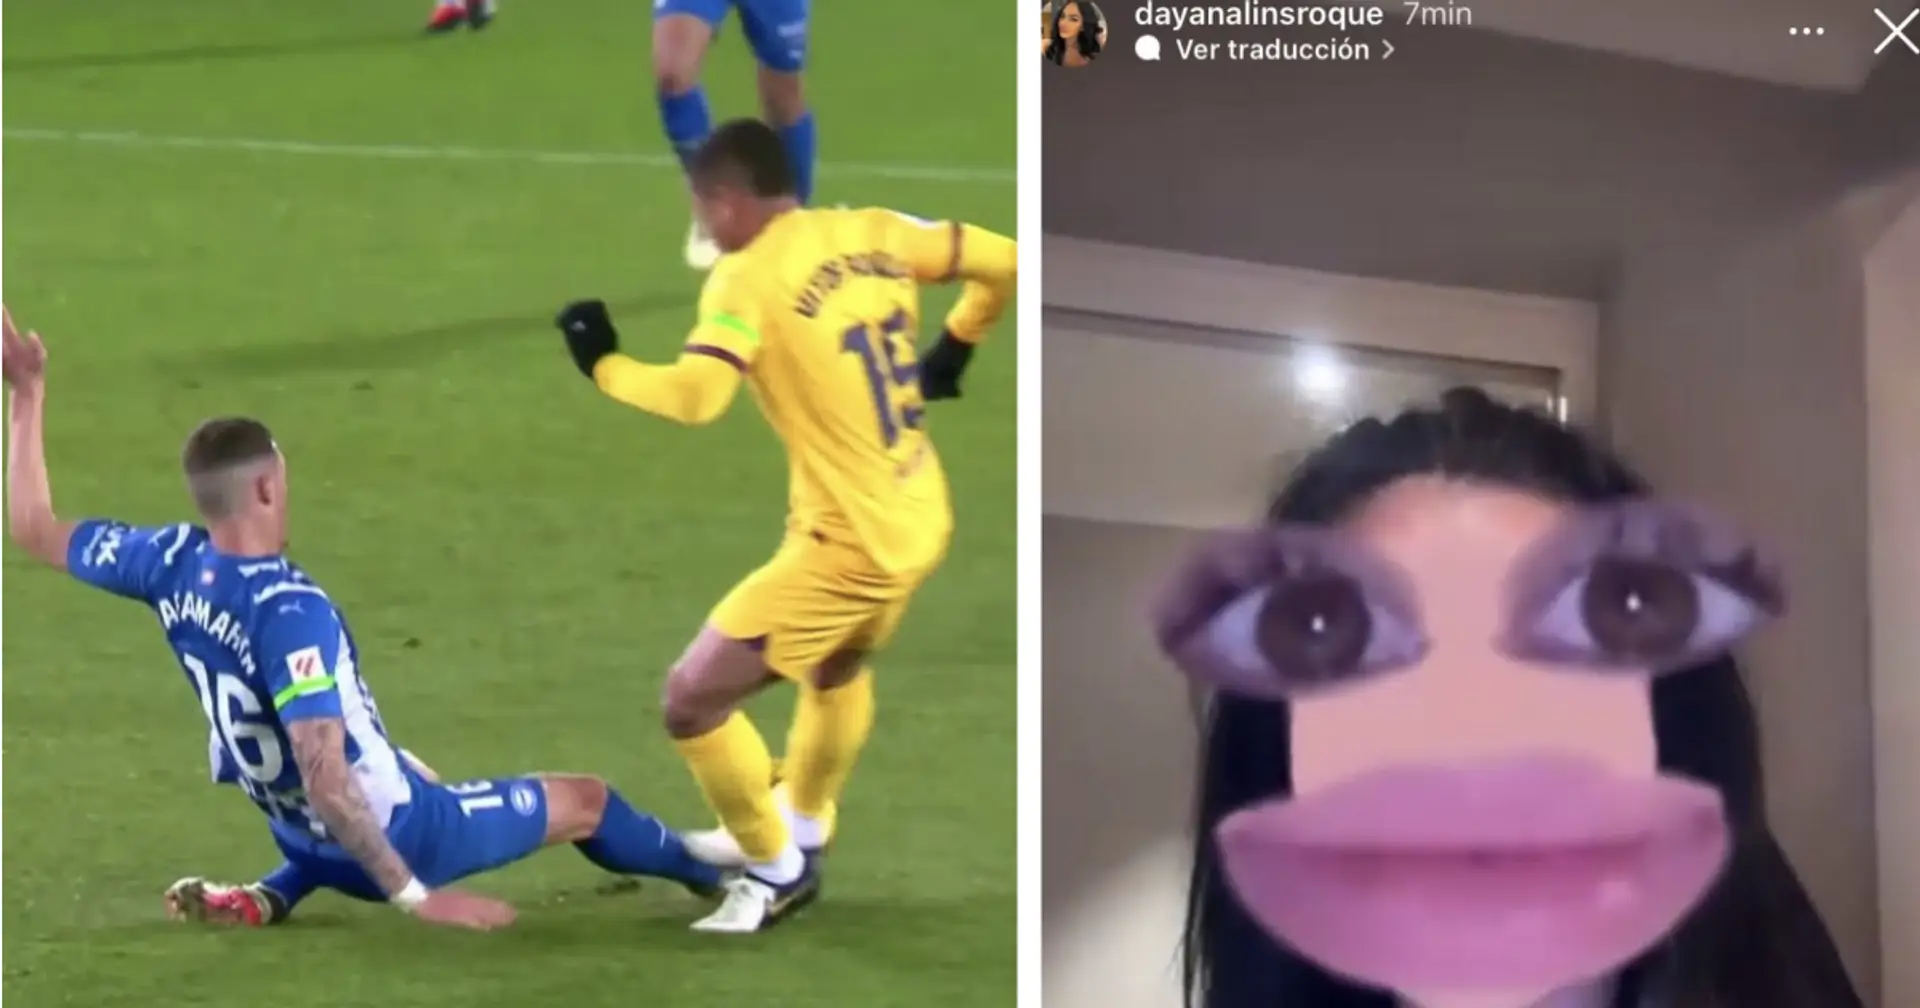 Vitor Roque's wife reacts to shocking red card for her husband